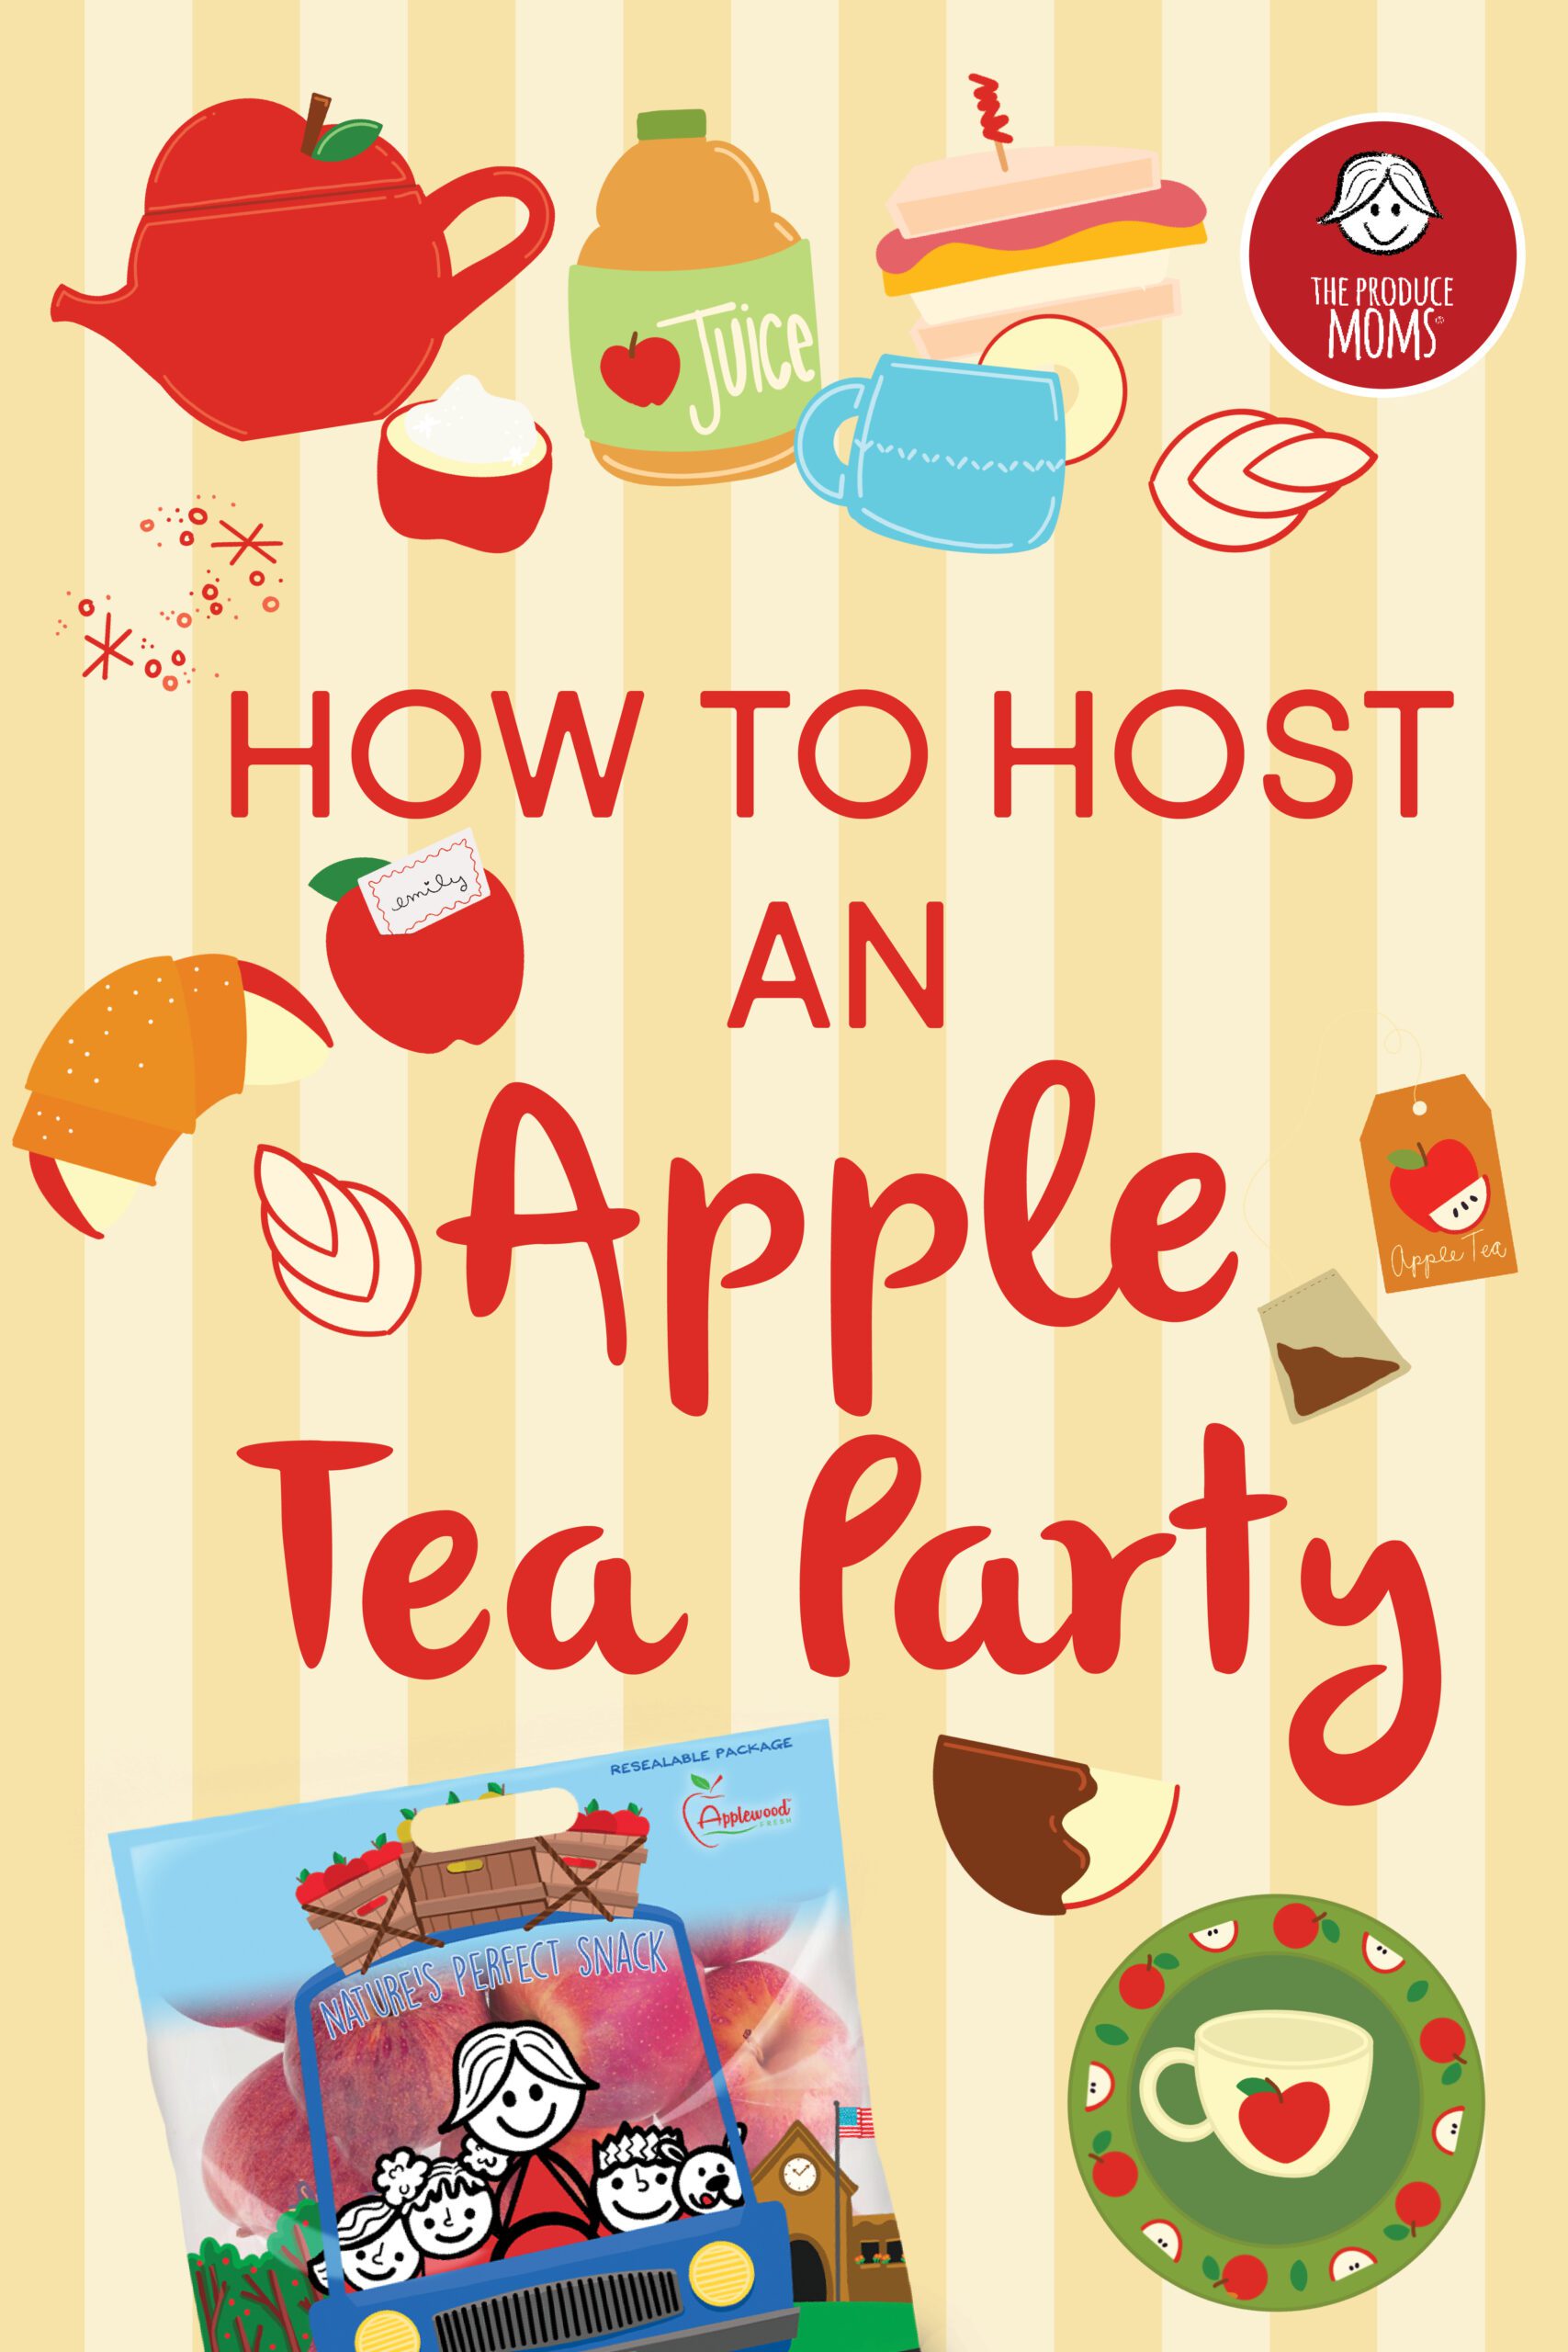 Pinterest Graphic: How to Host an Apple Tea Party